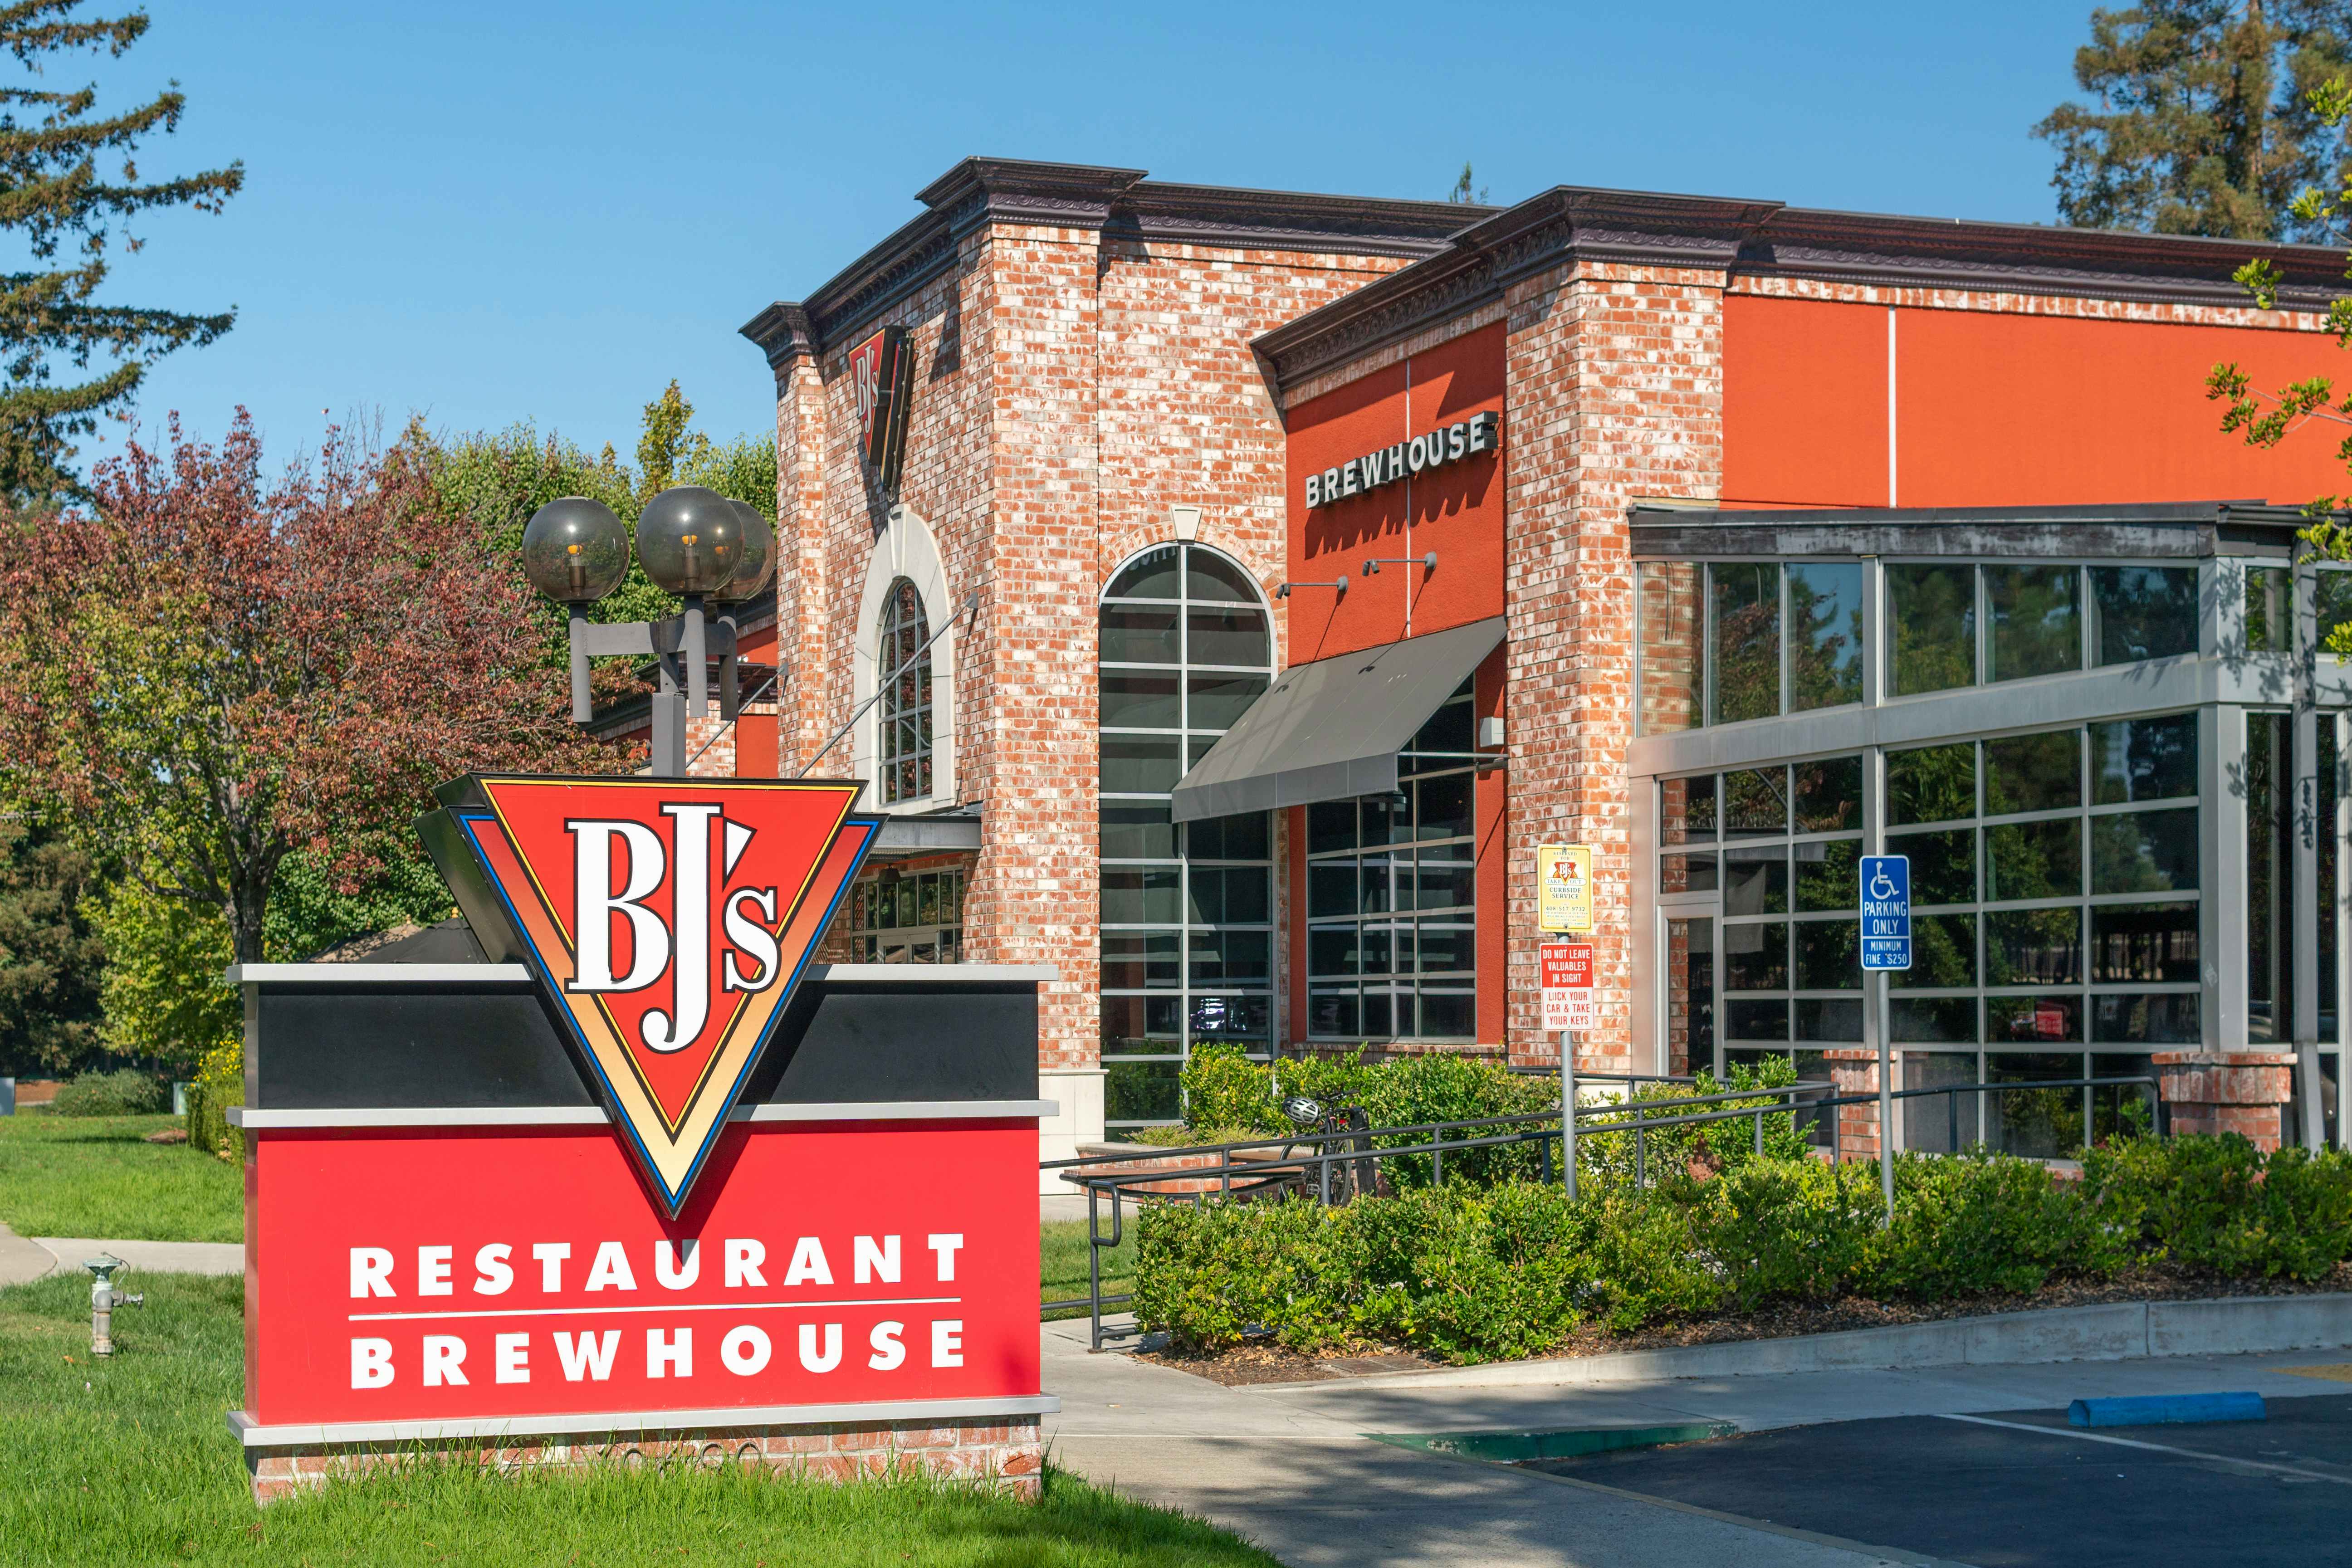 BJ Brewhouse